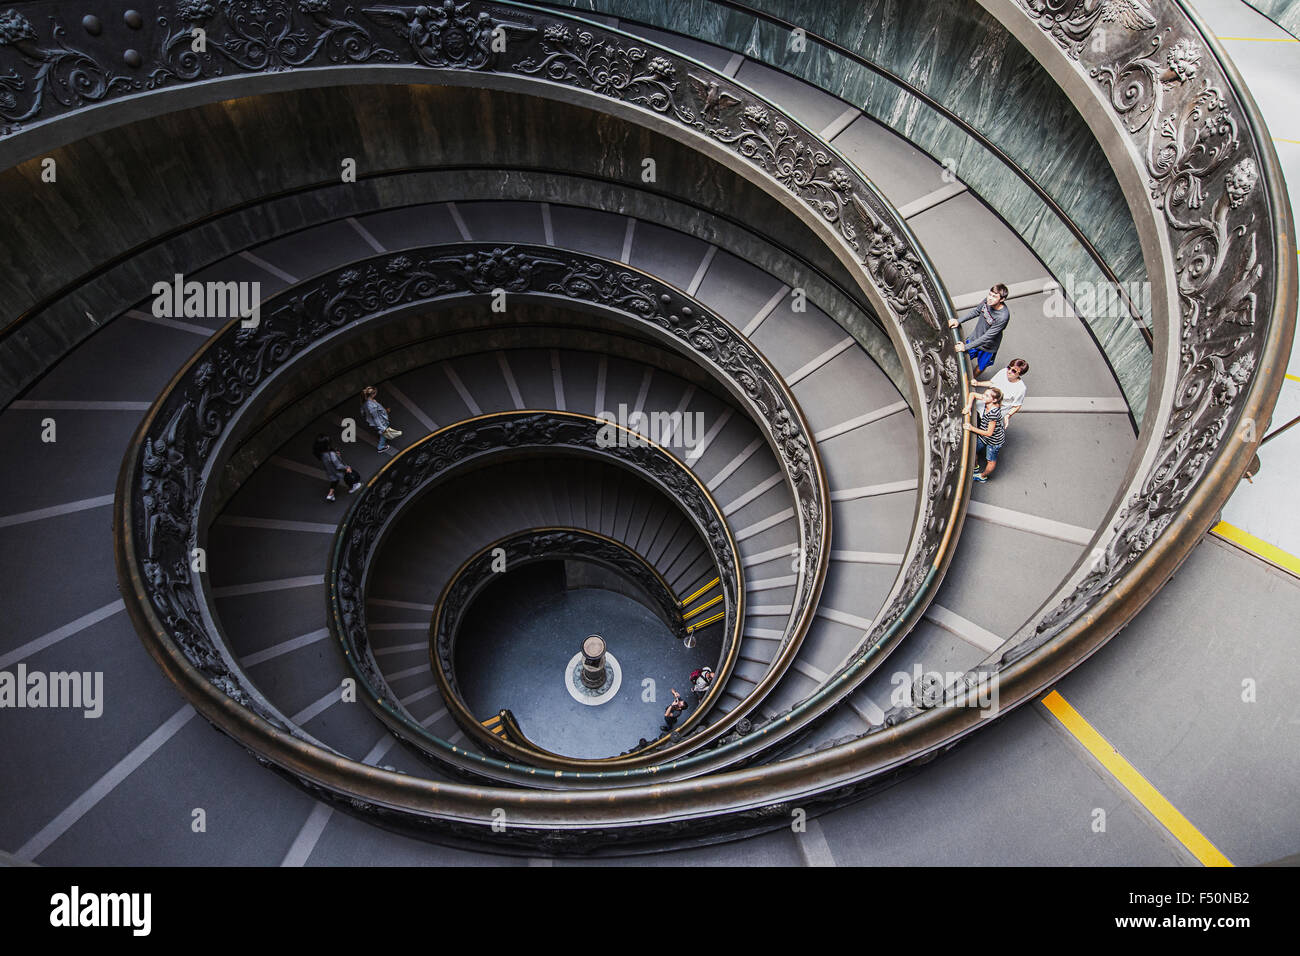 Spiral staircase in the Vatican Museum, Rome Italy Stock Photo